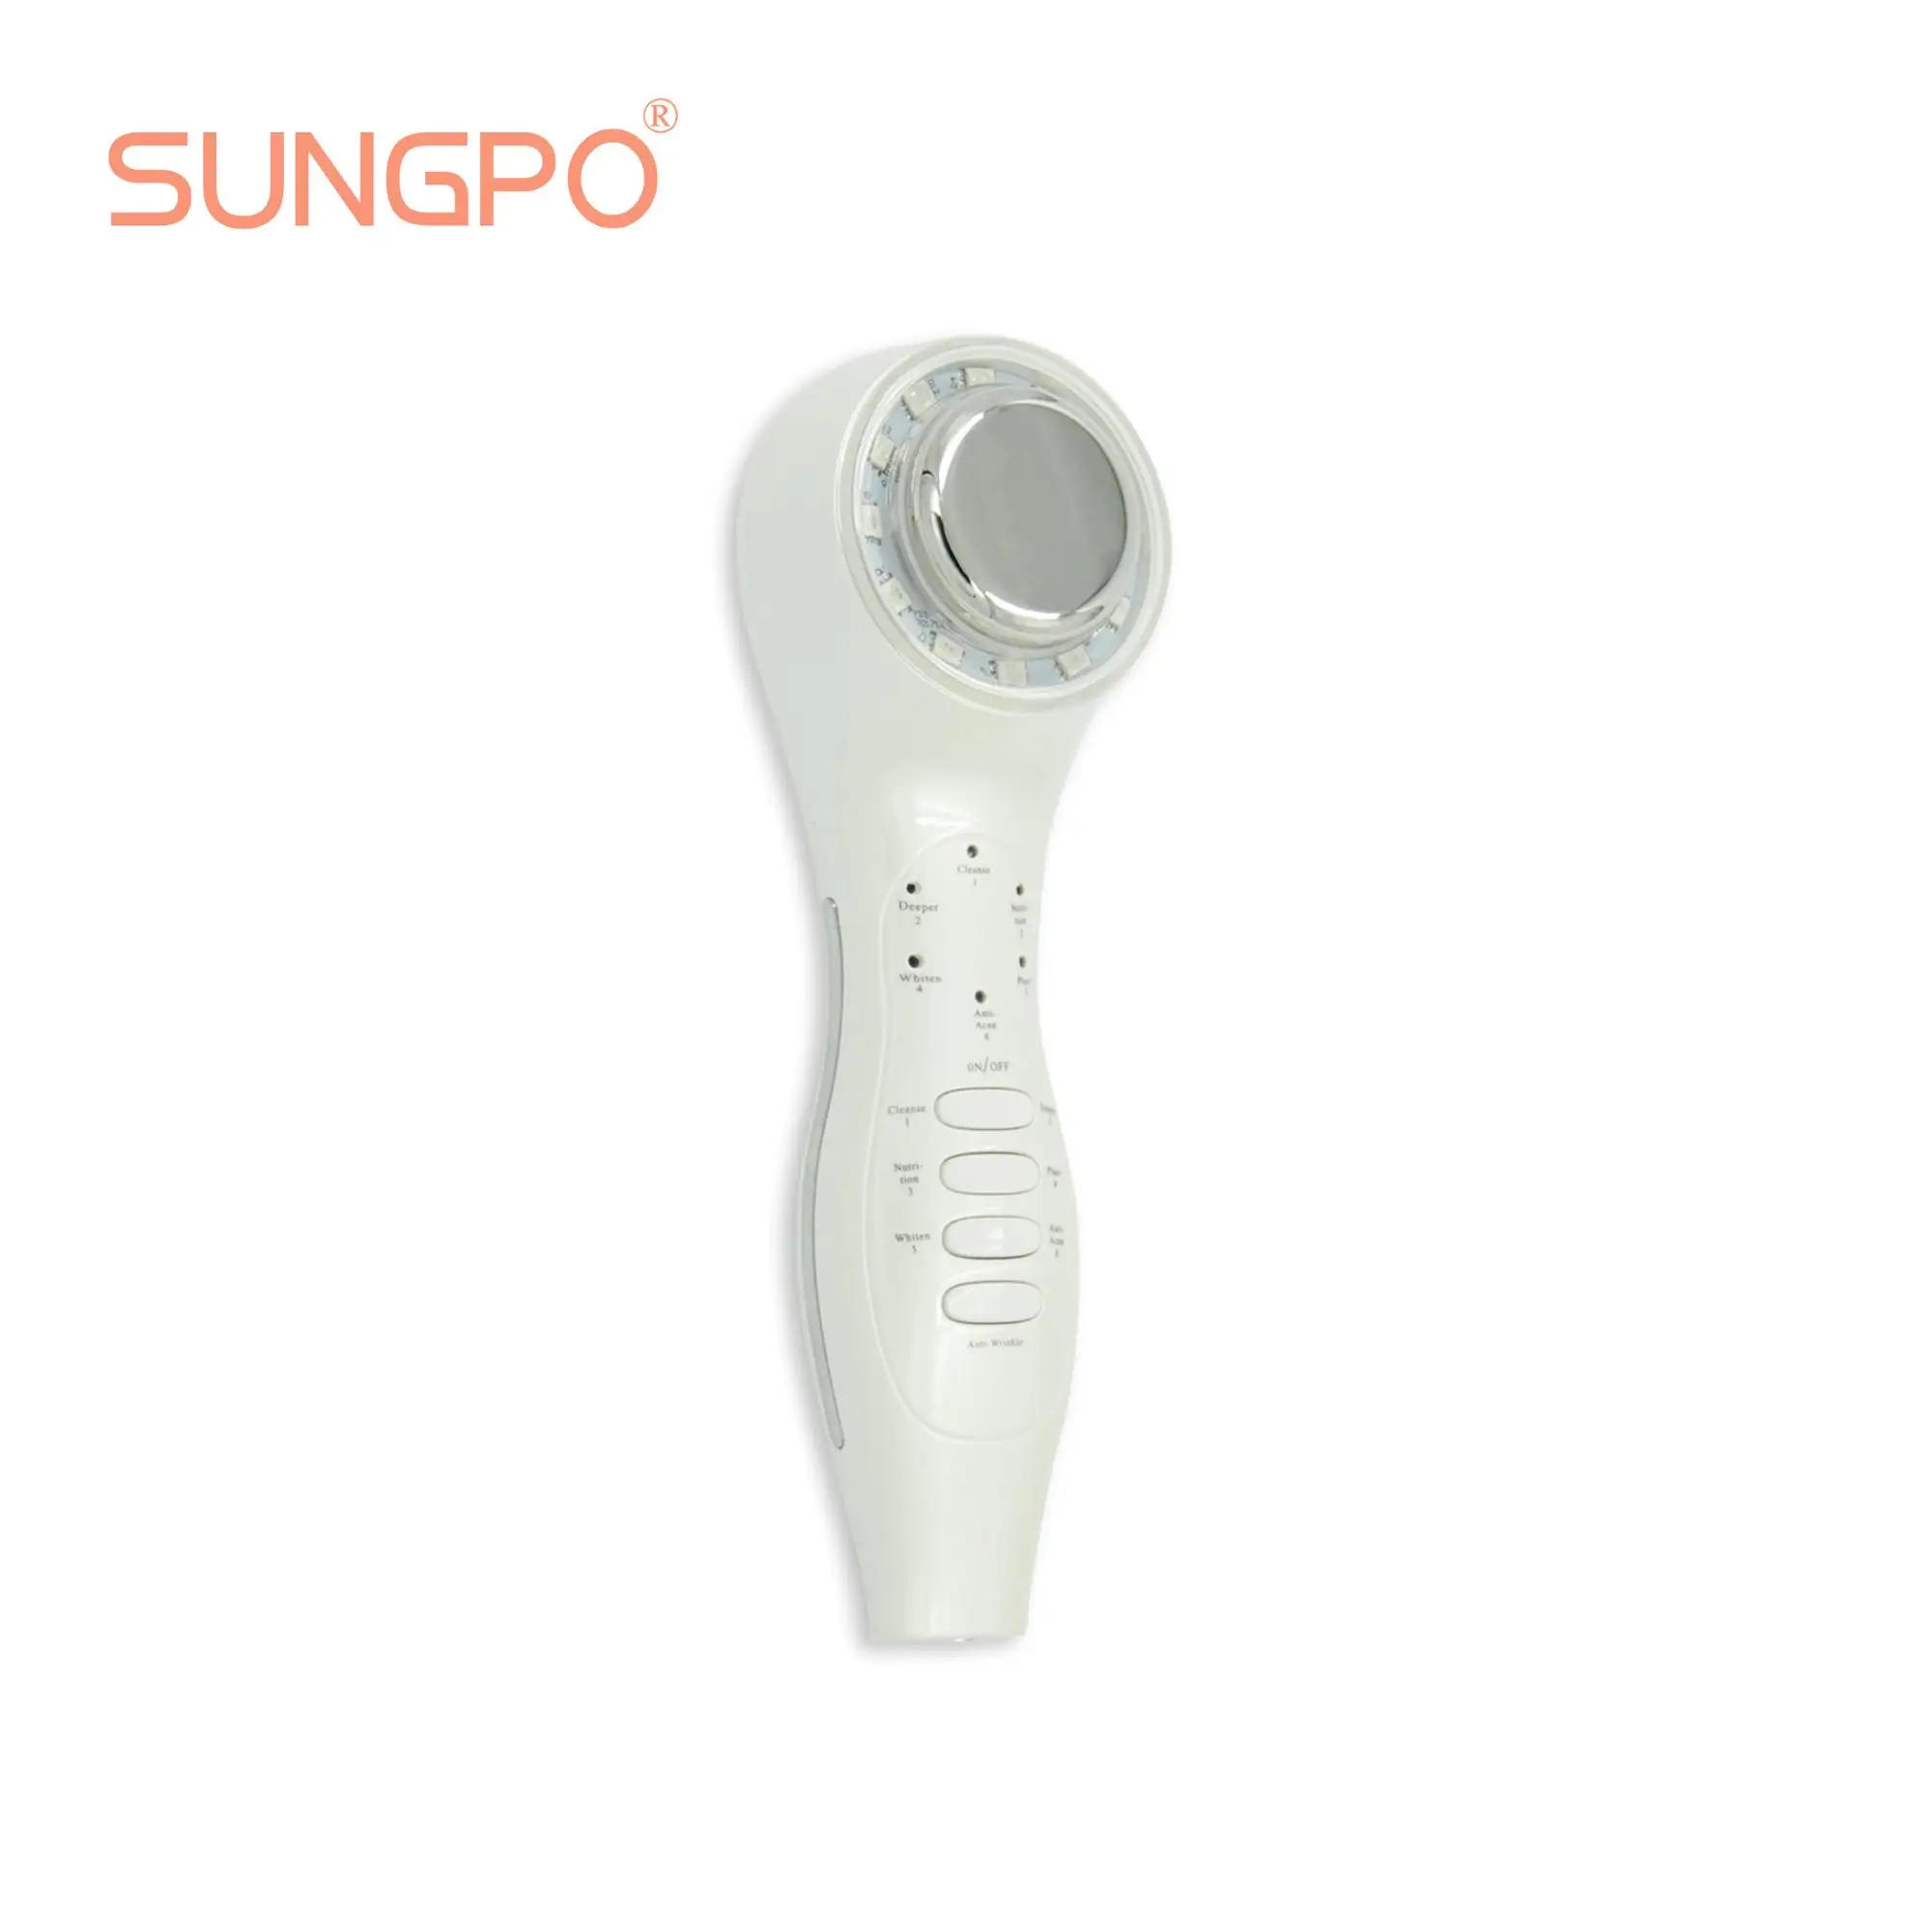 Best Selling Products Beauty and Personal Care Device Support Ultrasonic IONS Light Photon